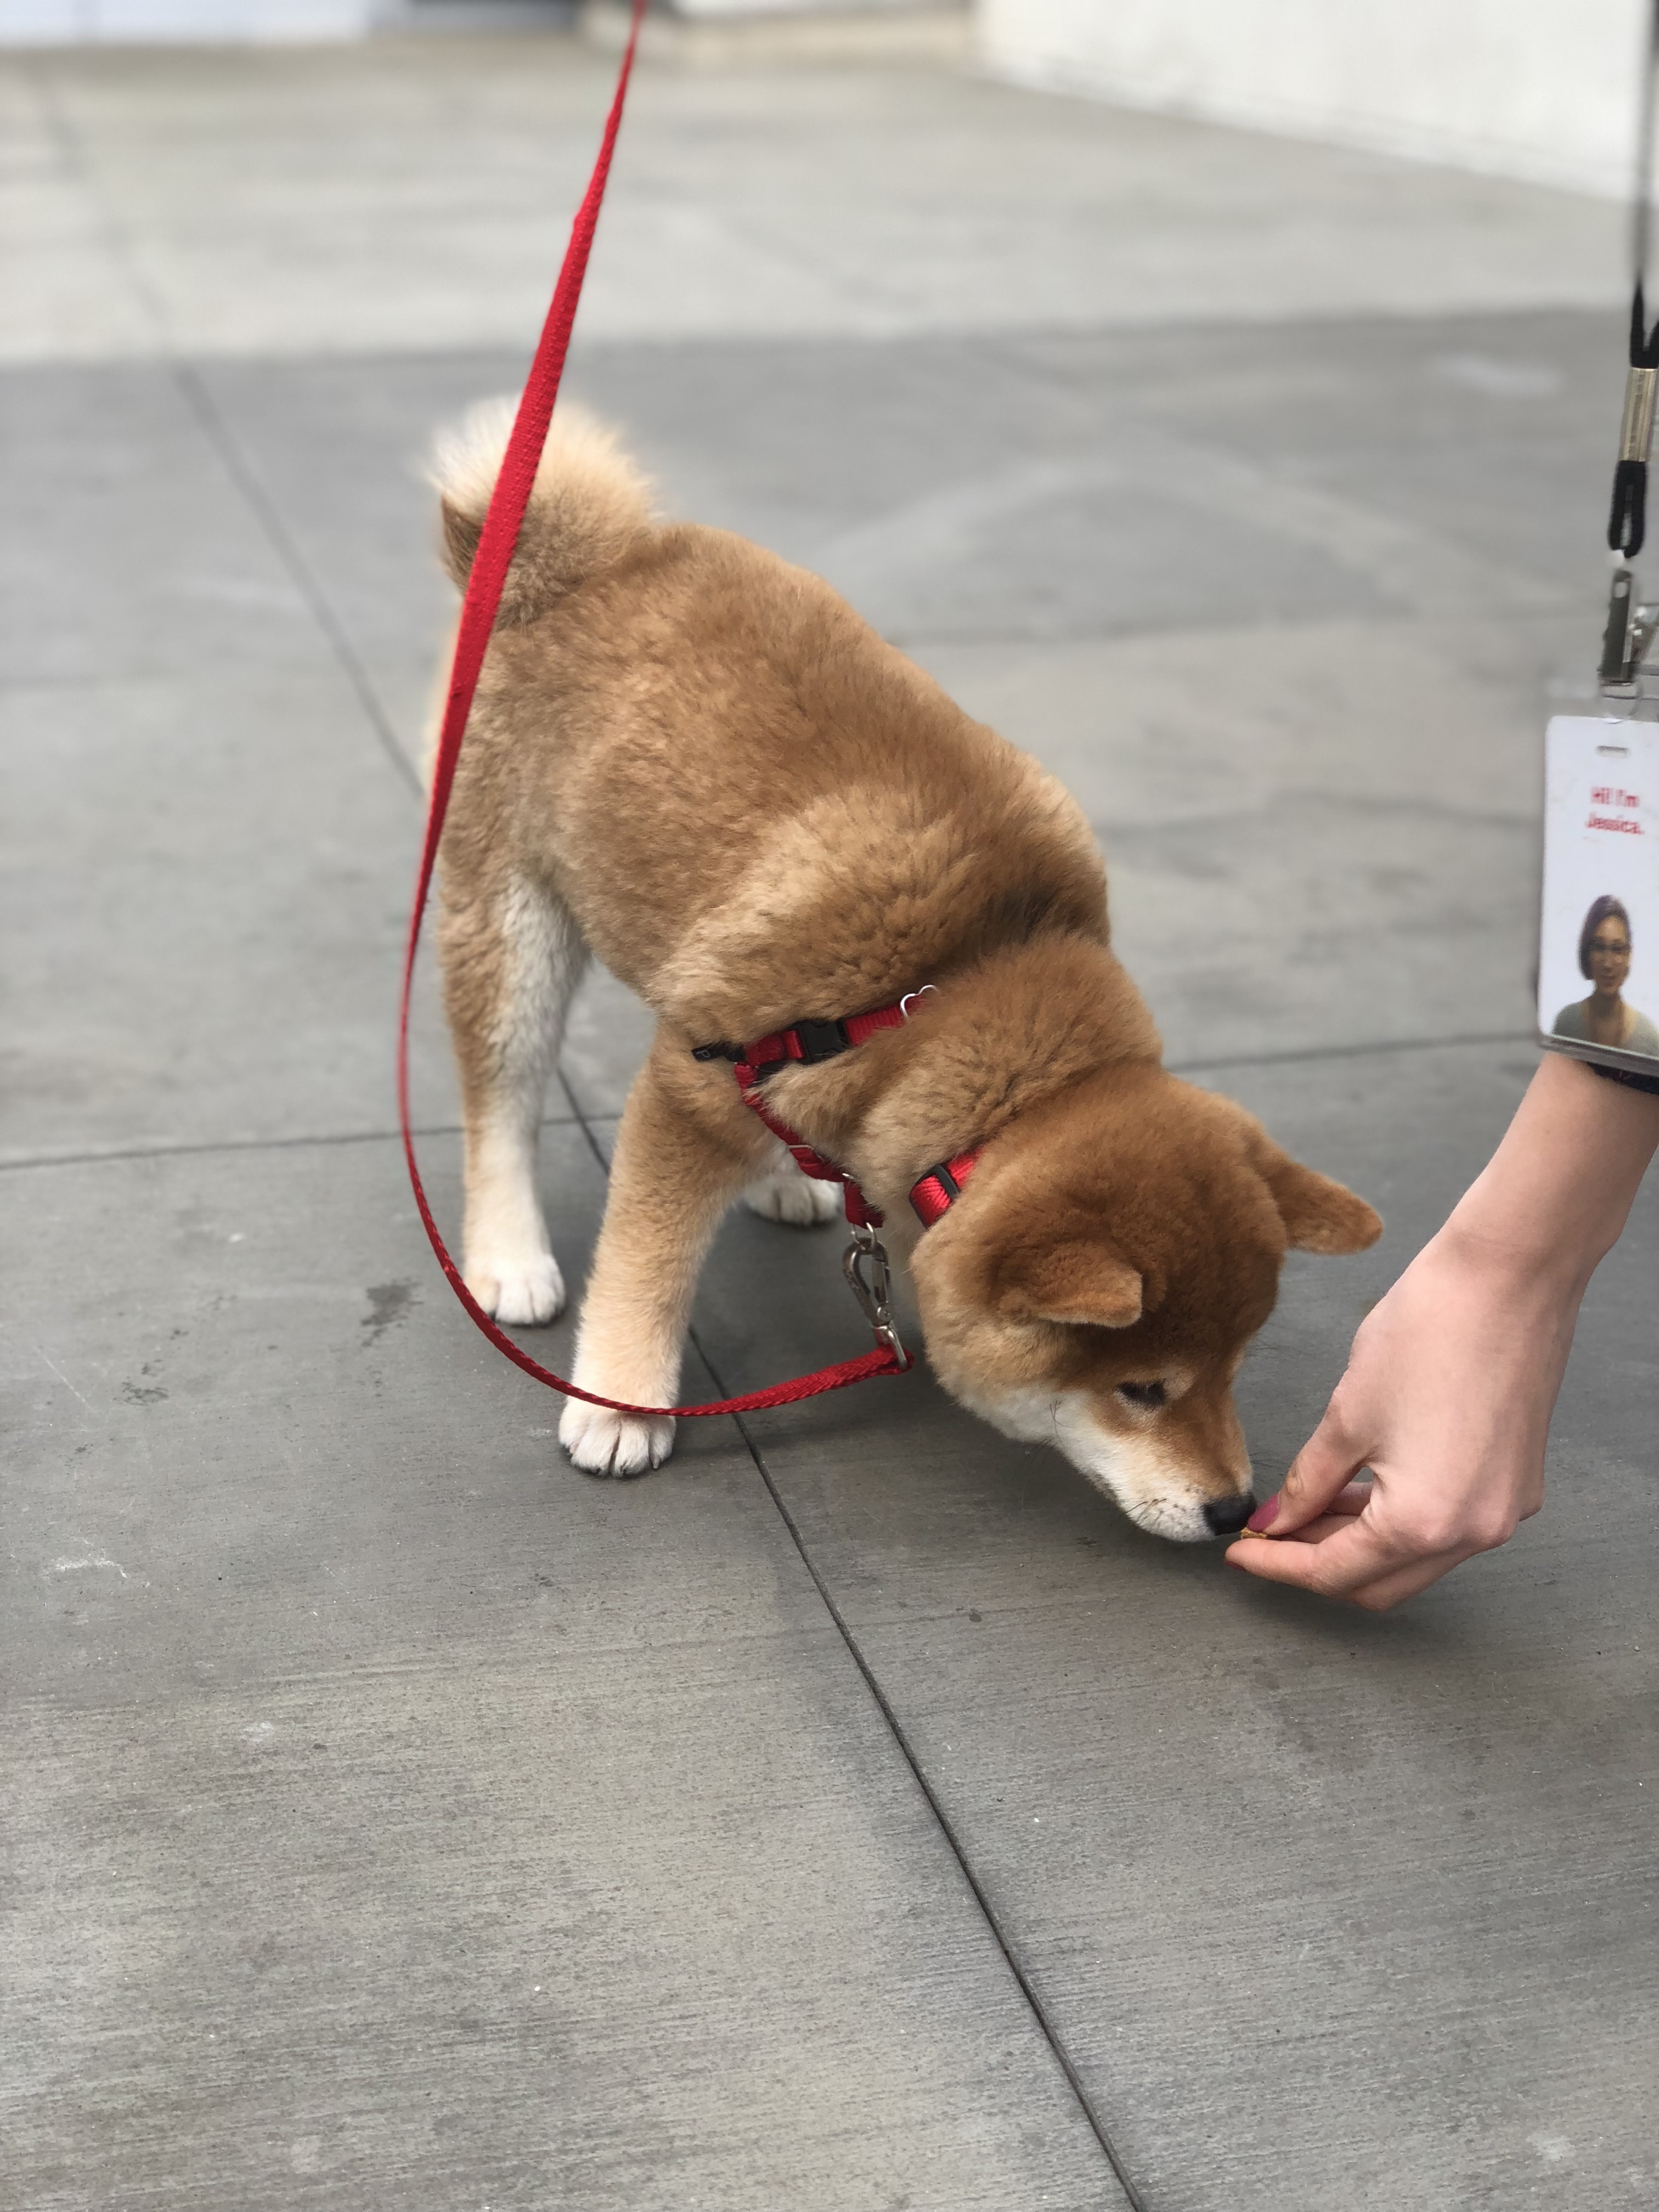 Shiba Inu Puppy Eating A Snack